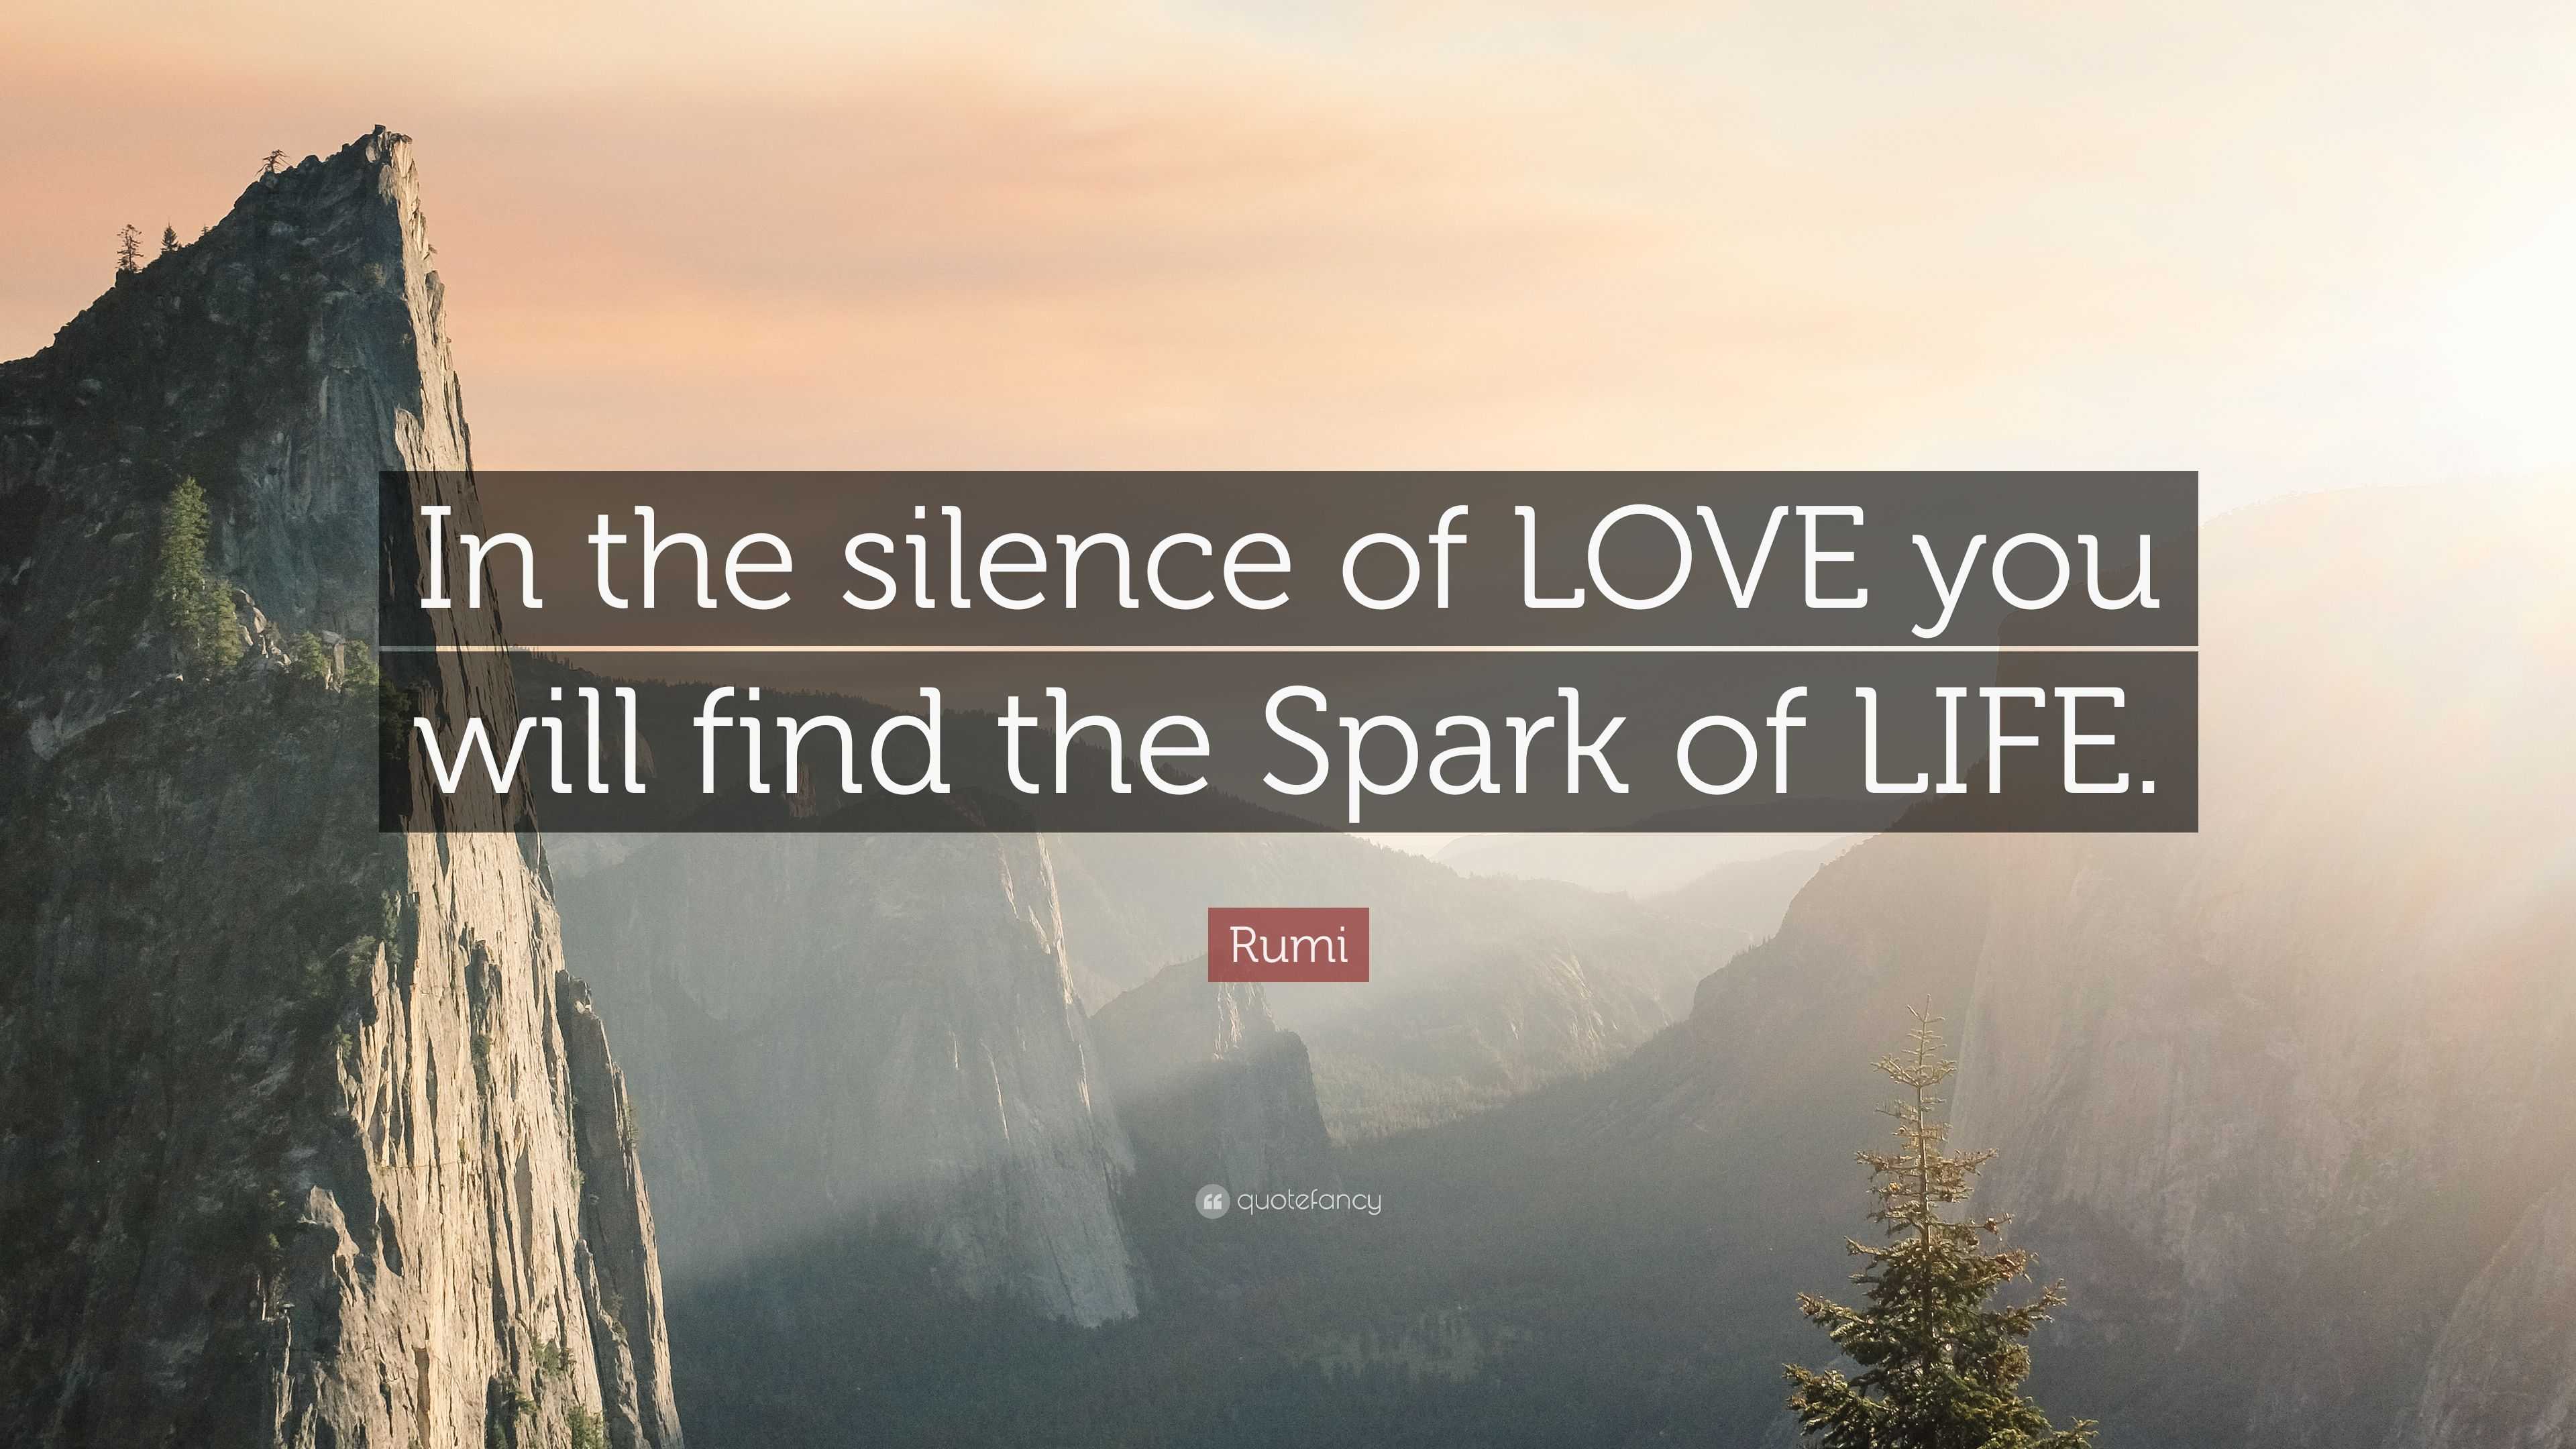 Rumi Quotes On Love And Life - Arise Quote